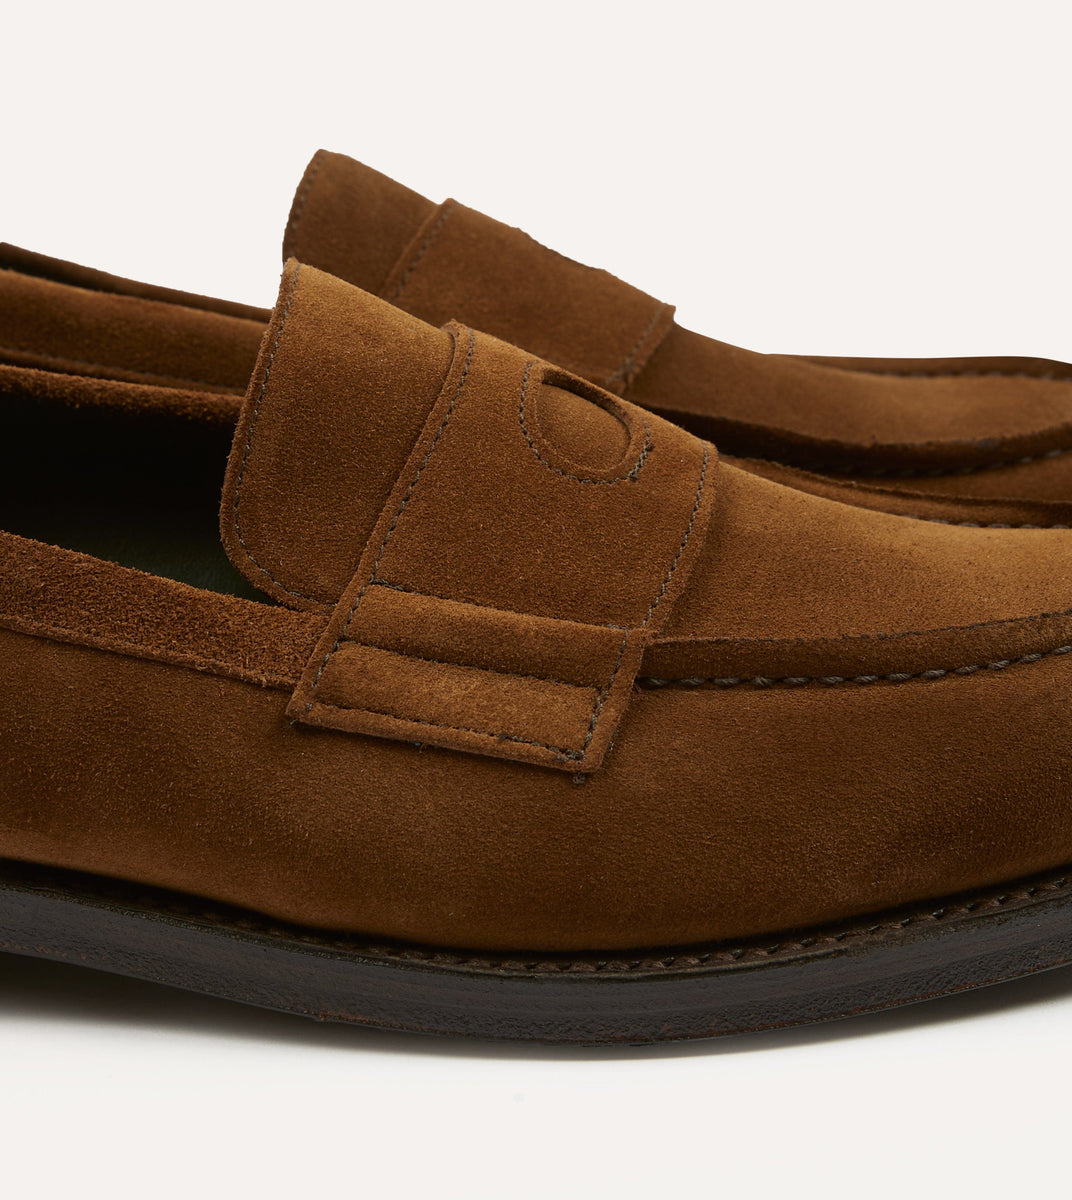 Snuff Suede Charles Goodyear Welted Penny Loafer – Drakes